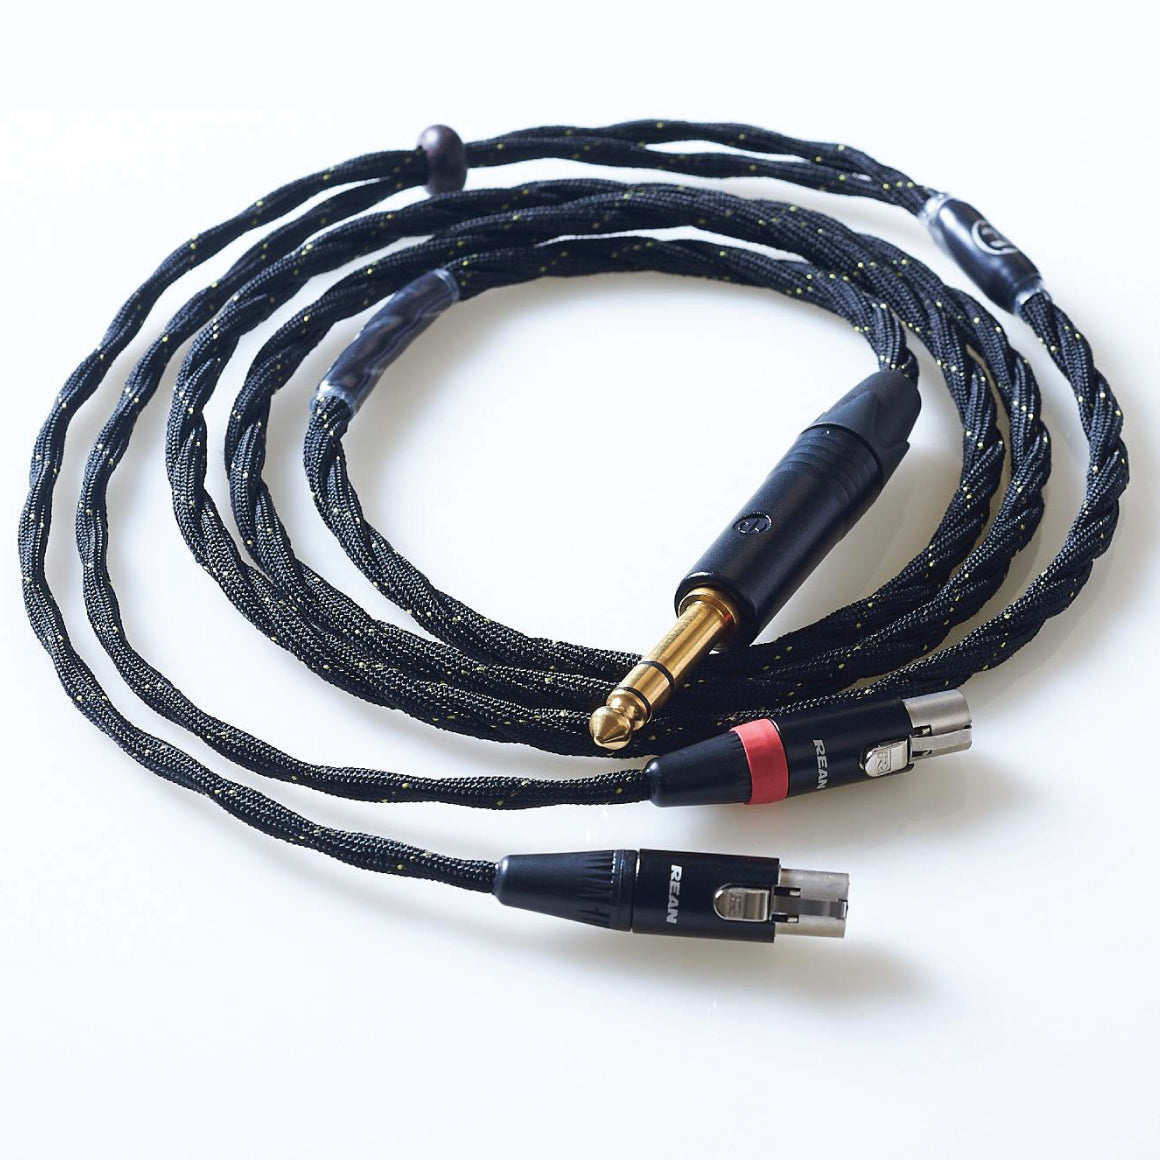 Headphone-Zone-Headgear Audio-Audeze LCD-2, LCD-3, LCD-4, LCD-X, LCD-XC Headphone Replacement Cable /Black Sleeved